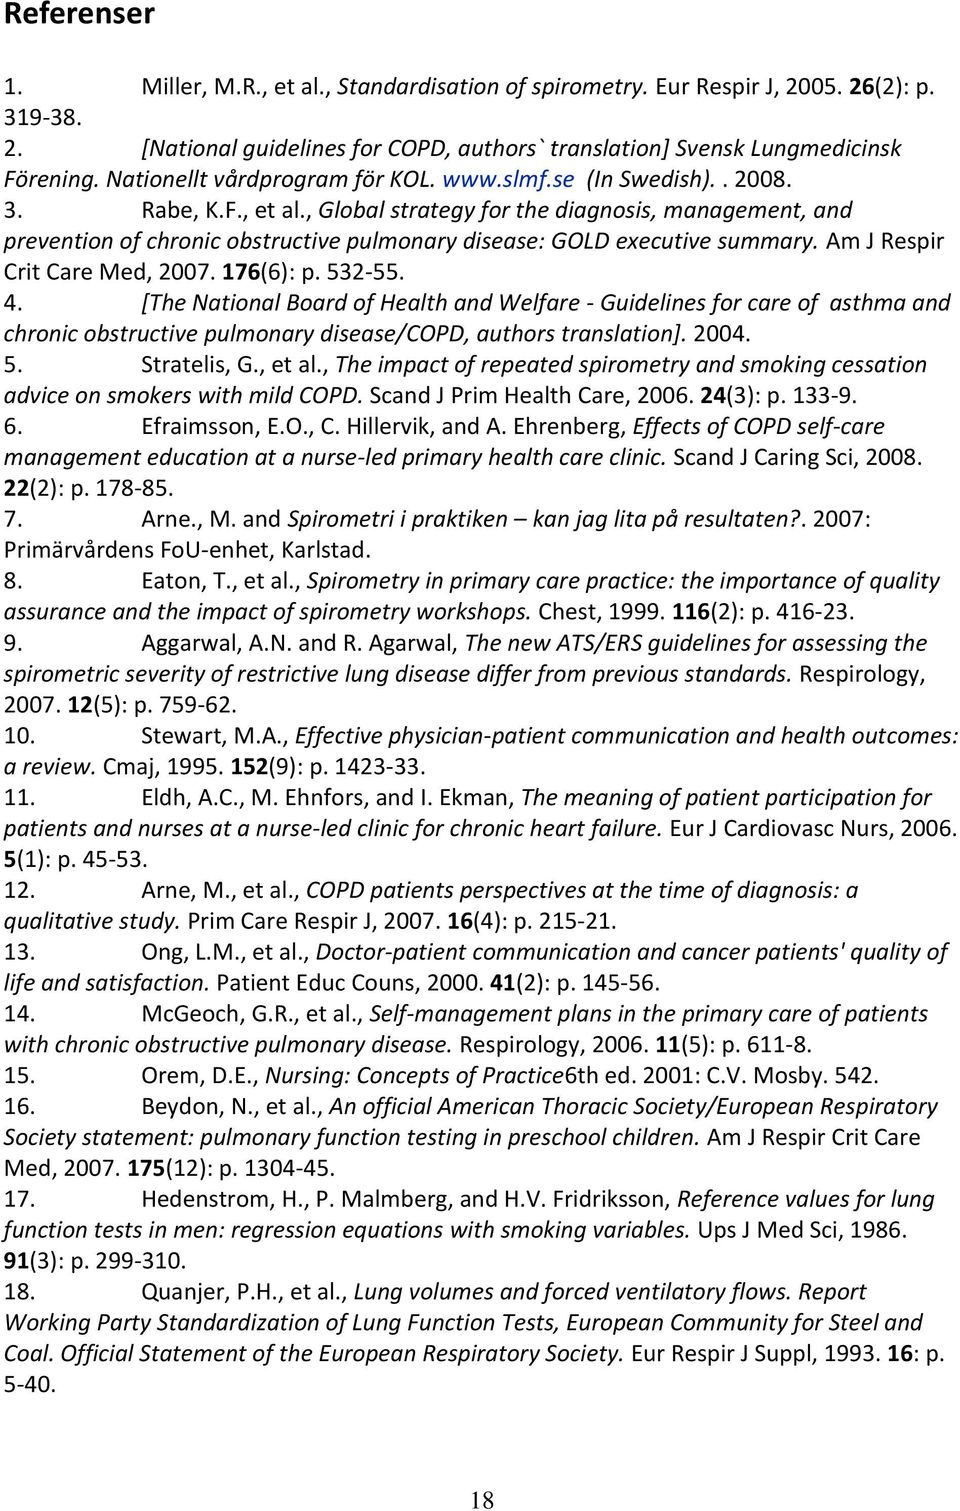 , Global strategy for the diagnosis, management, and prevention of chronic obstructive pulmonary disease: GOLD executive summary. Am J Respir Crit Care Med, 2007. 176(6): p. 532-55. 4.